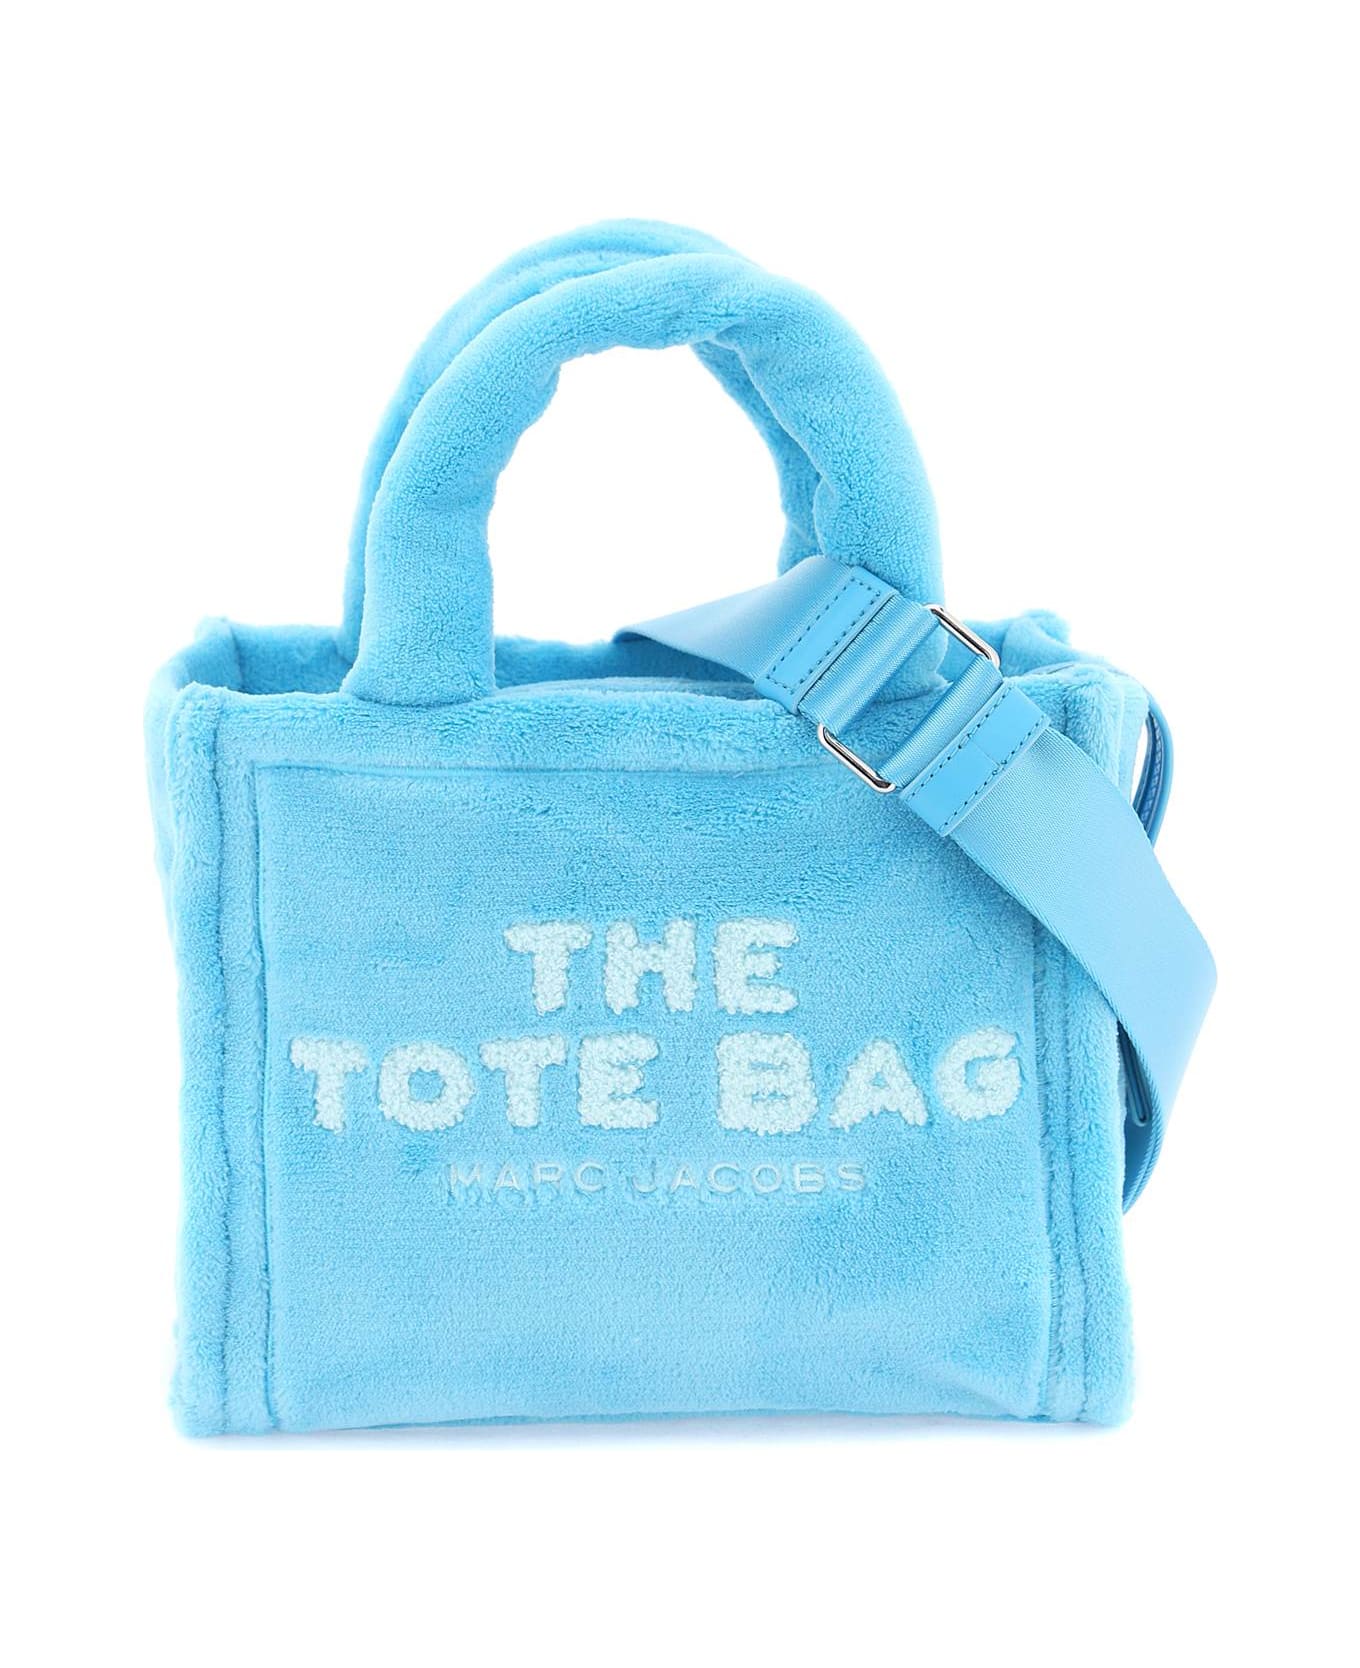 Marc Jacobs 'the Terry Small Tote Bag' - Clear Blue トートバッグ